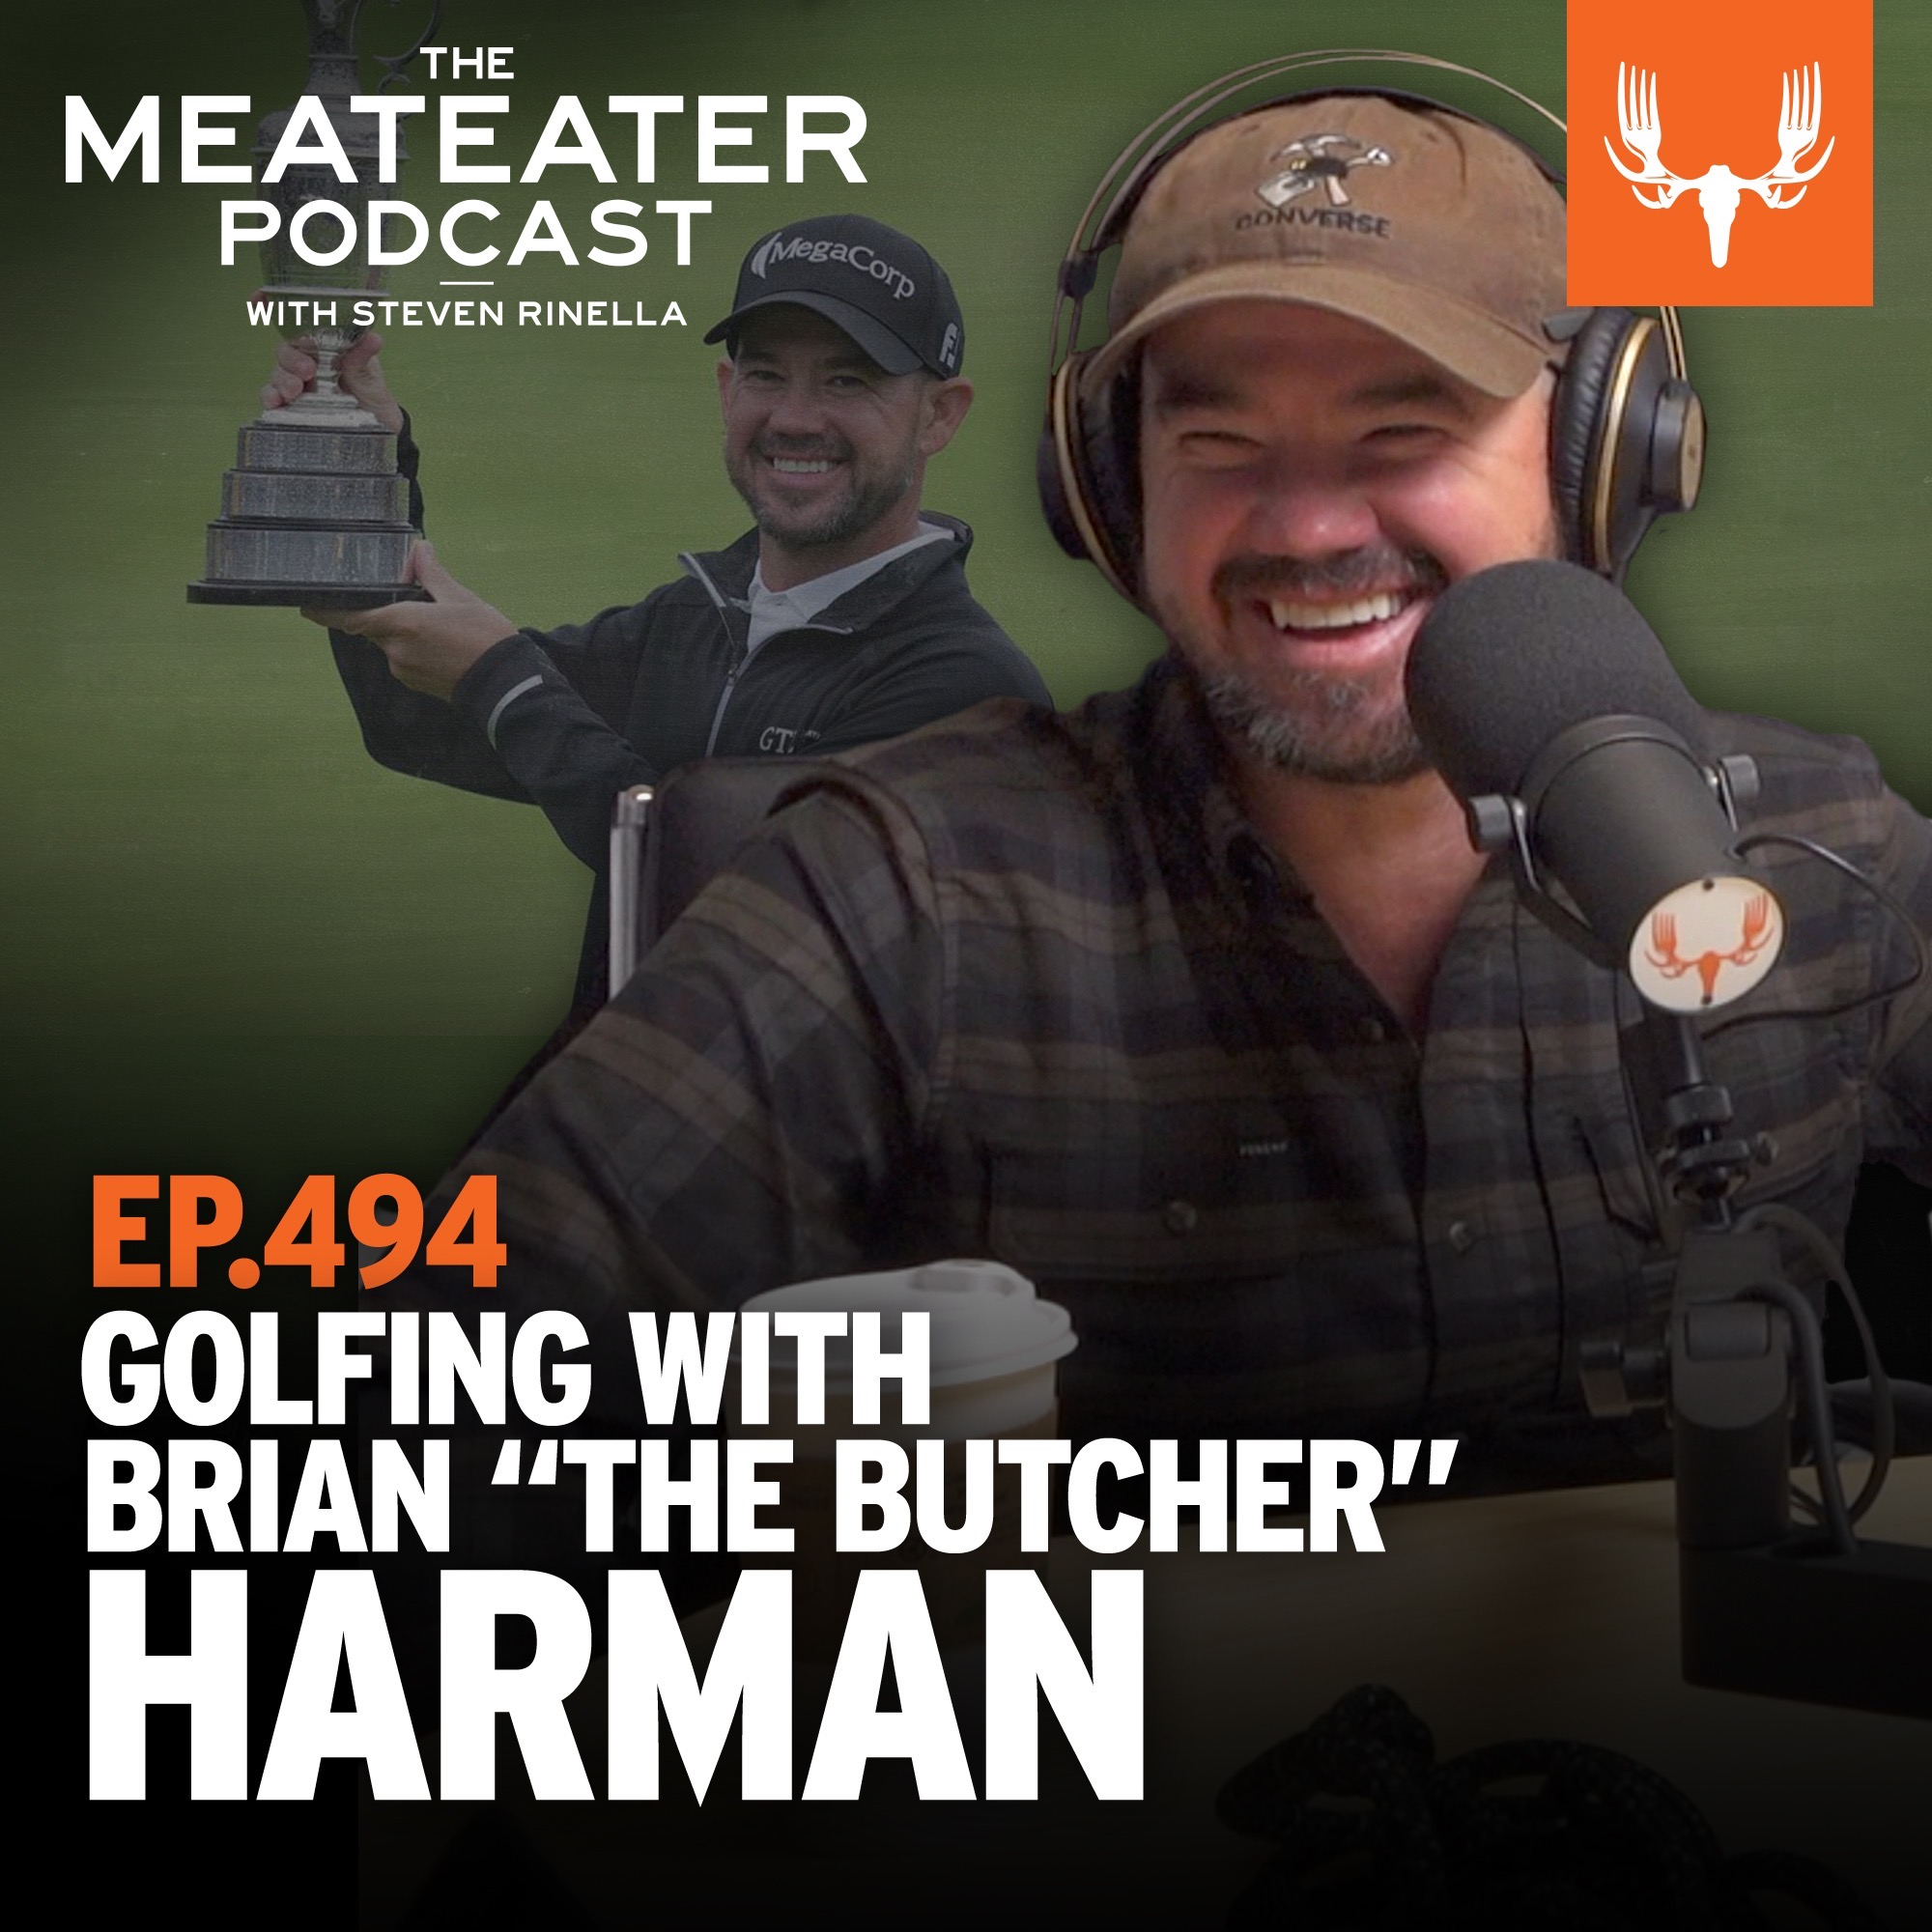 Ep. 494: Golfing with Brian "The Butcher" Harman